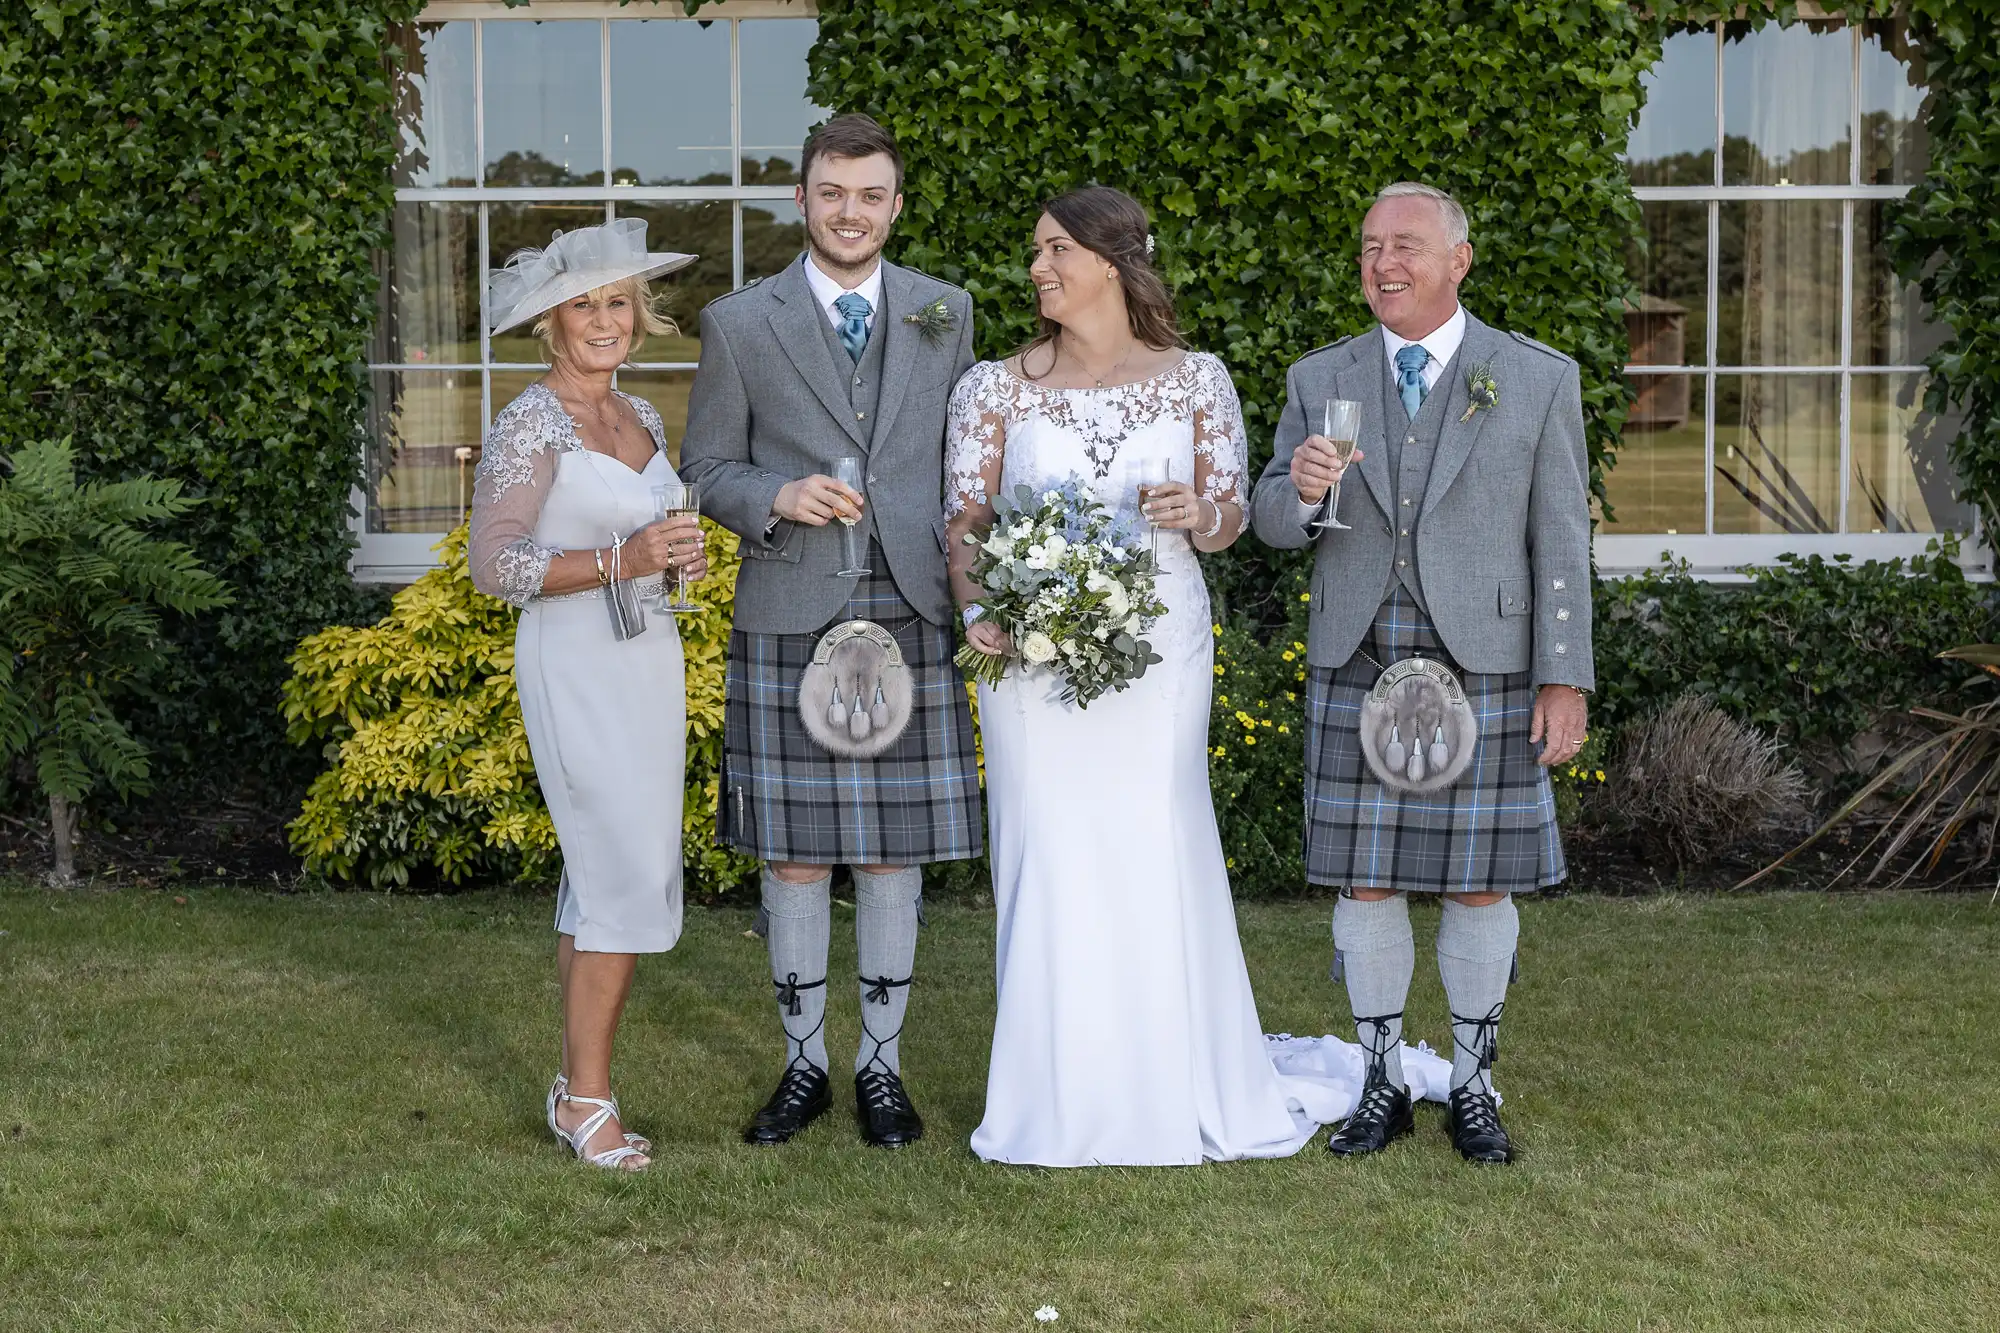 A wedding photo featuring a bride and groom with two older adults, all smiling; men in kilts and women in dresses, standing on a lawn before a building.